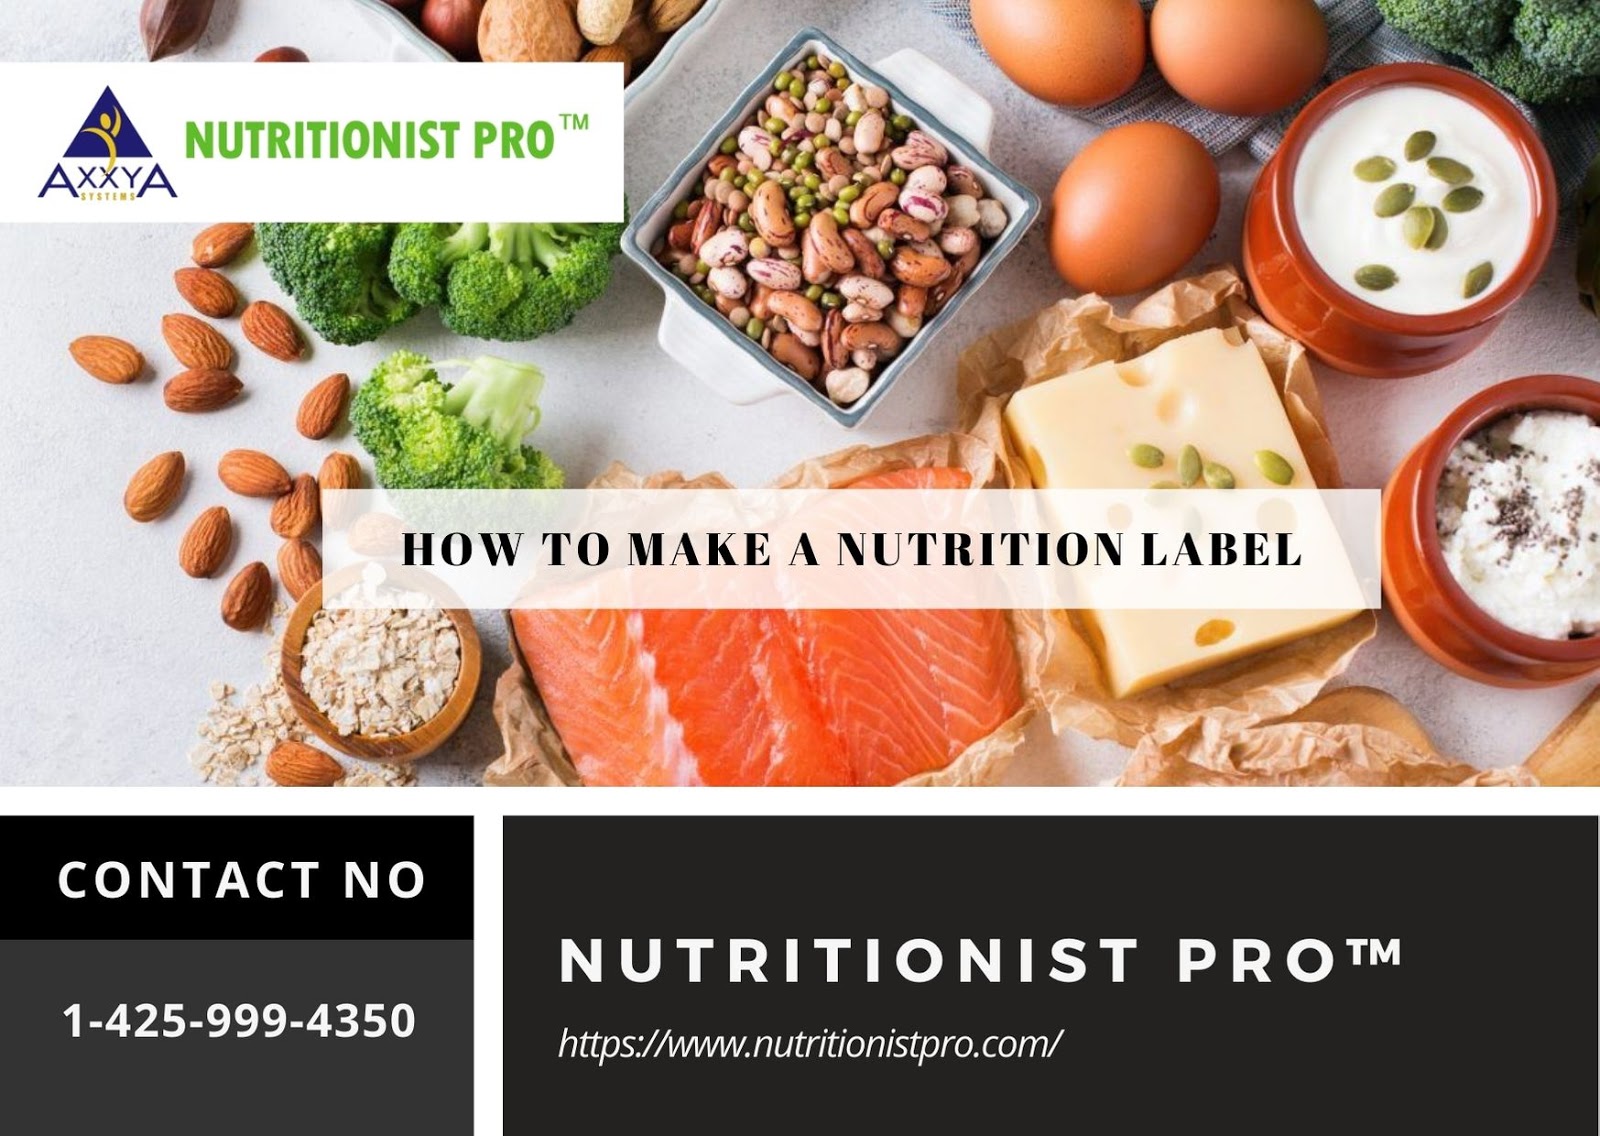 How to Make a Nutrition Label